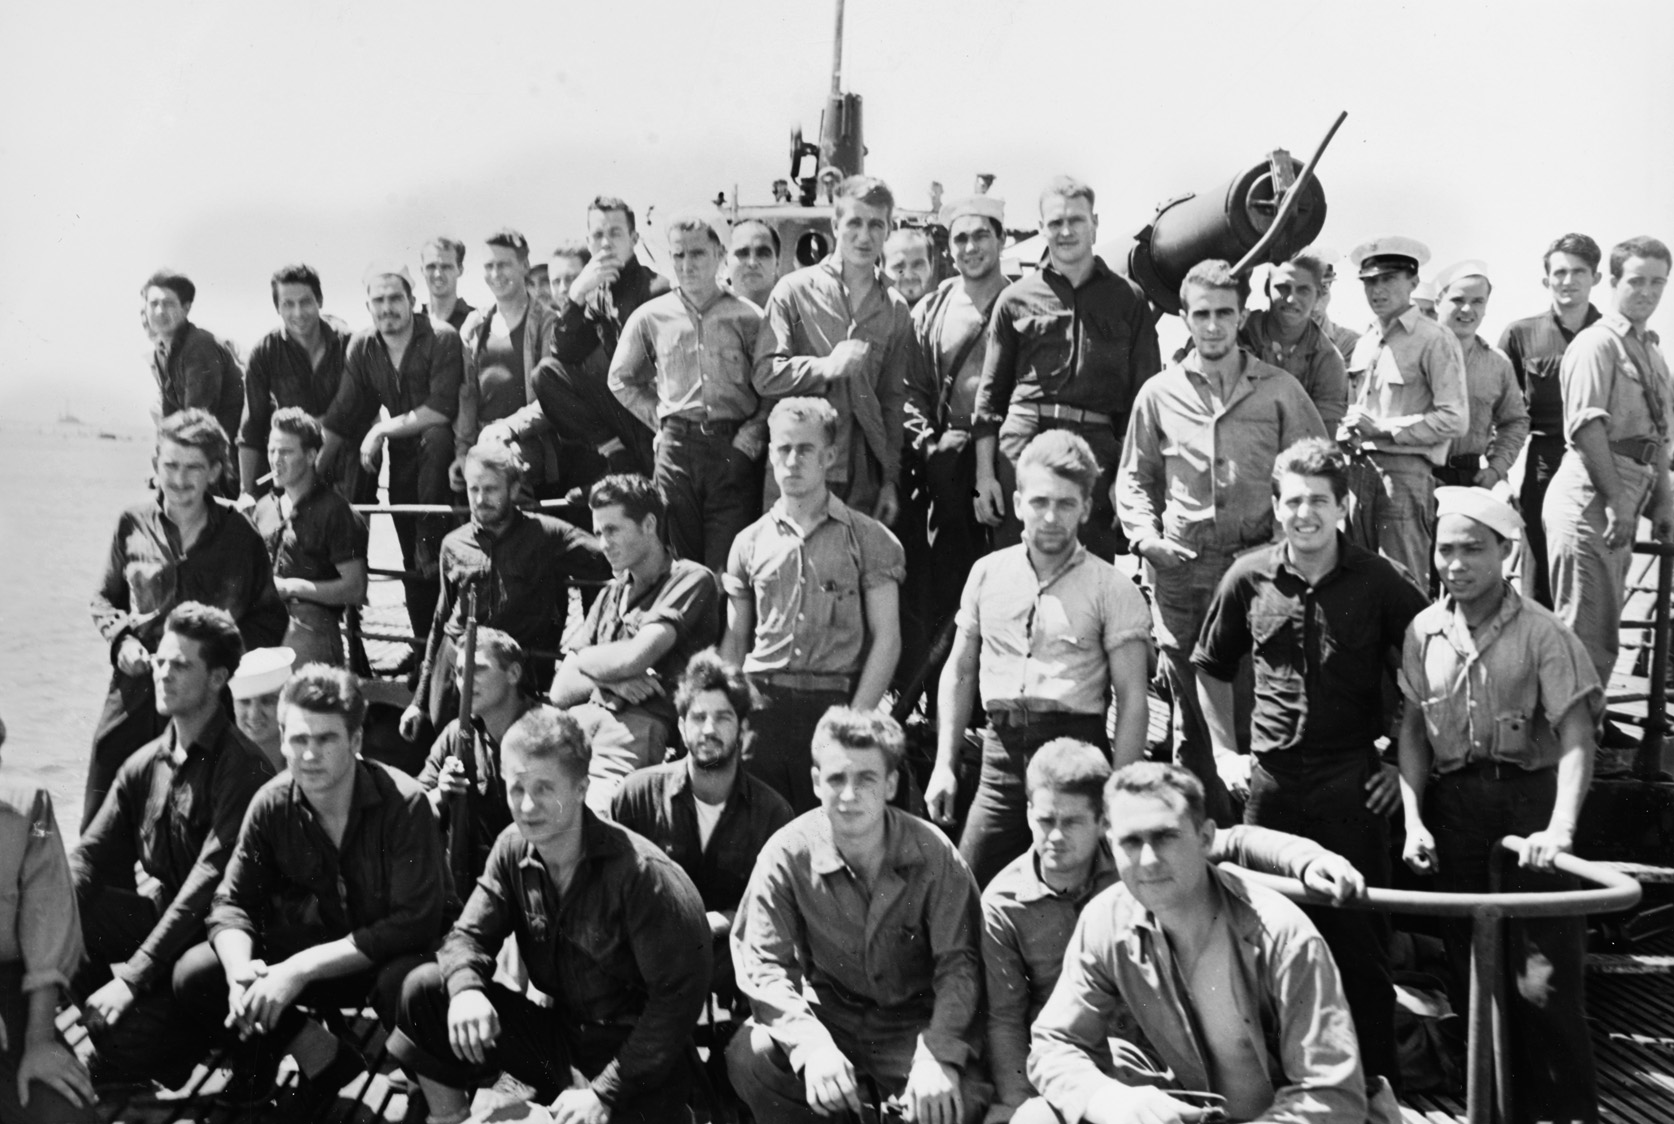 After their baptism of fire at Makin, some members of the 2nd Marine Raider Battalion bear the stoic gaze of combat veterans aboard the submarine USS Nautilus as they enter Pearl Harbor on August 25, 1942. A Marine at left is holding a captured Japanese Arisaka rifle.